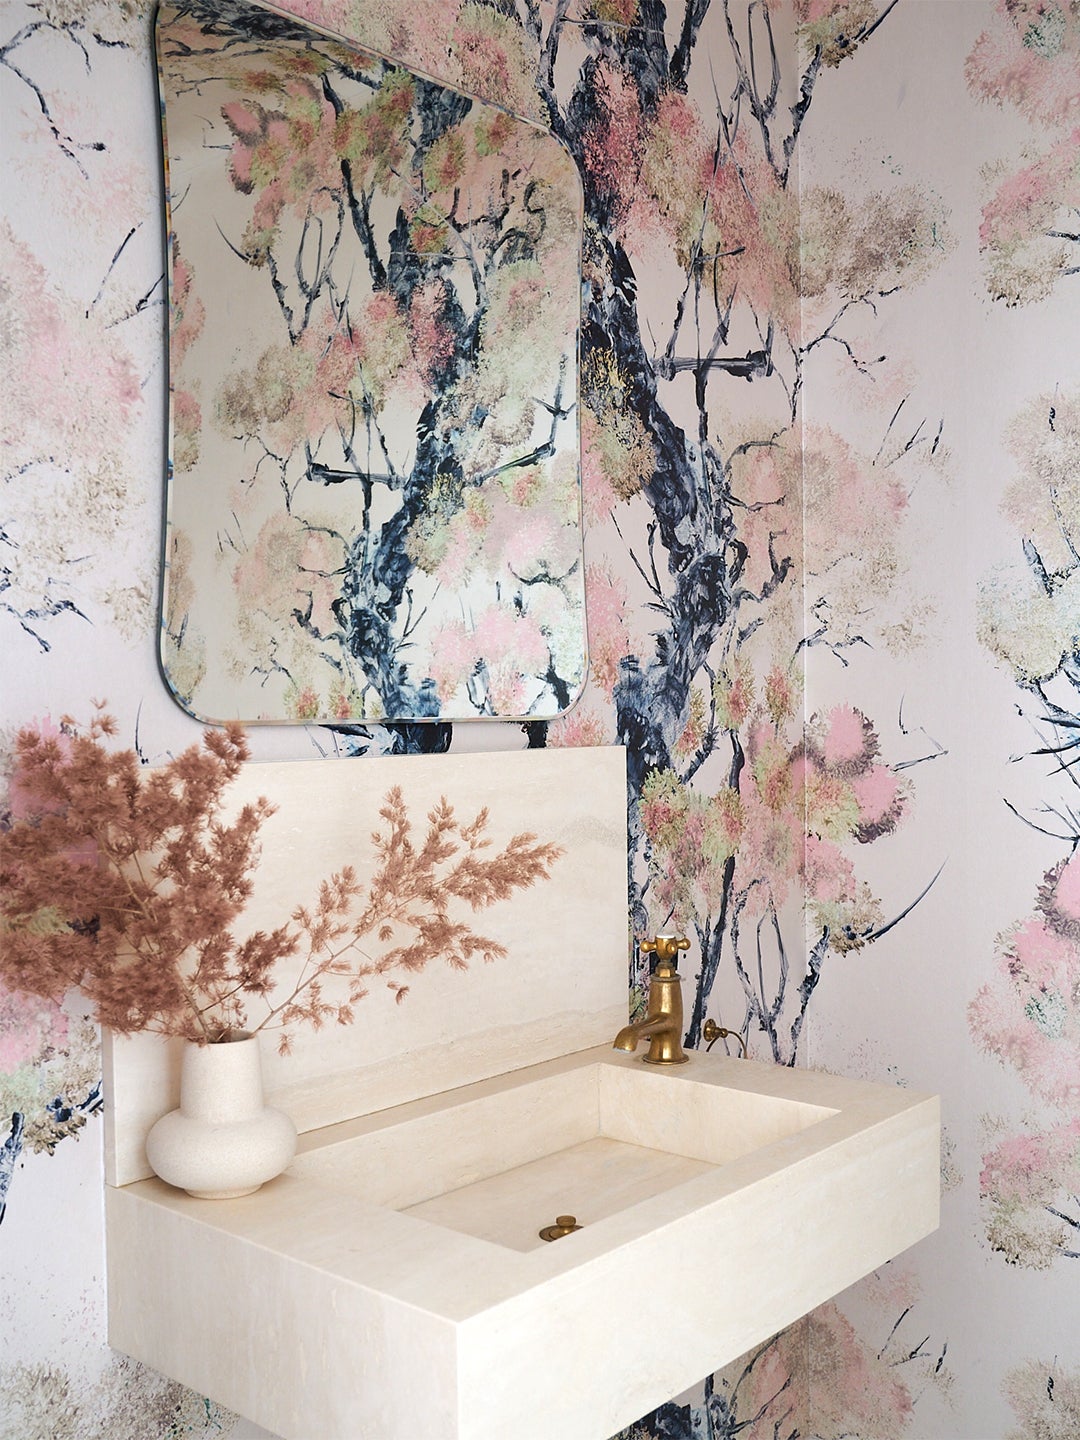 16 Memorable Powder Room Wallpaper Ideas, Including One That Takes Over the Door